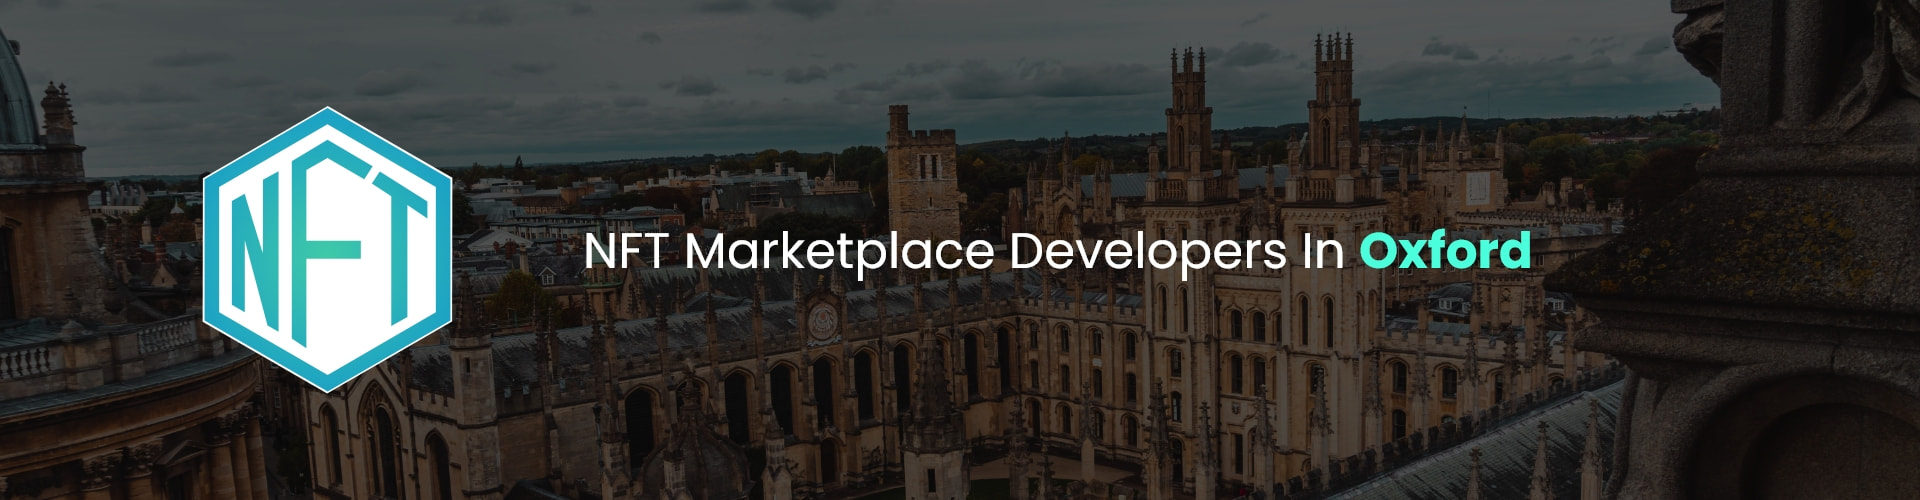 hire nft marketplace developers in Oxford